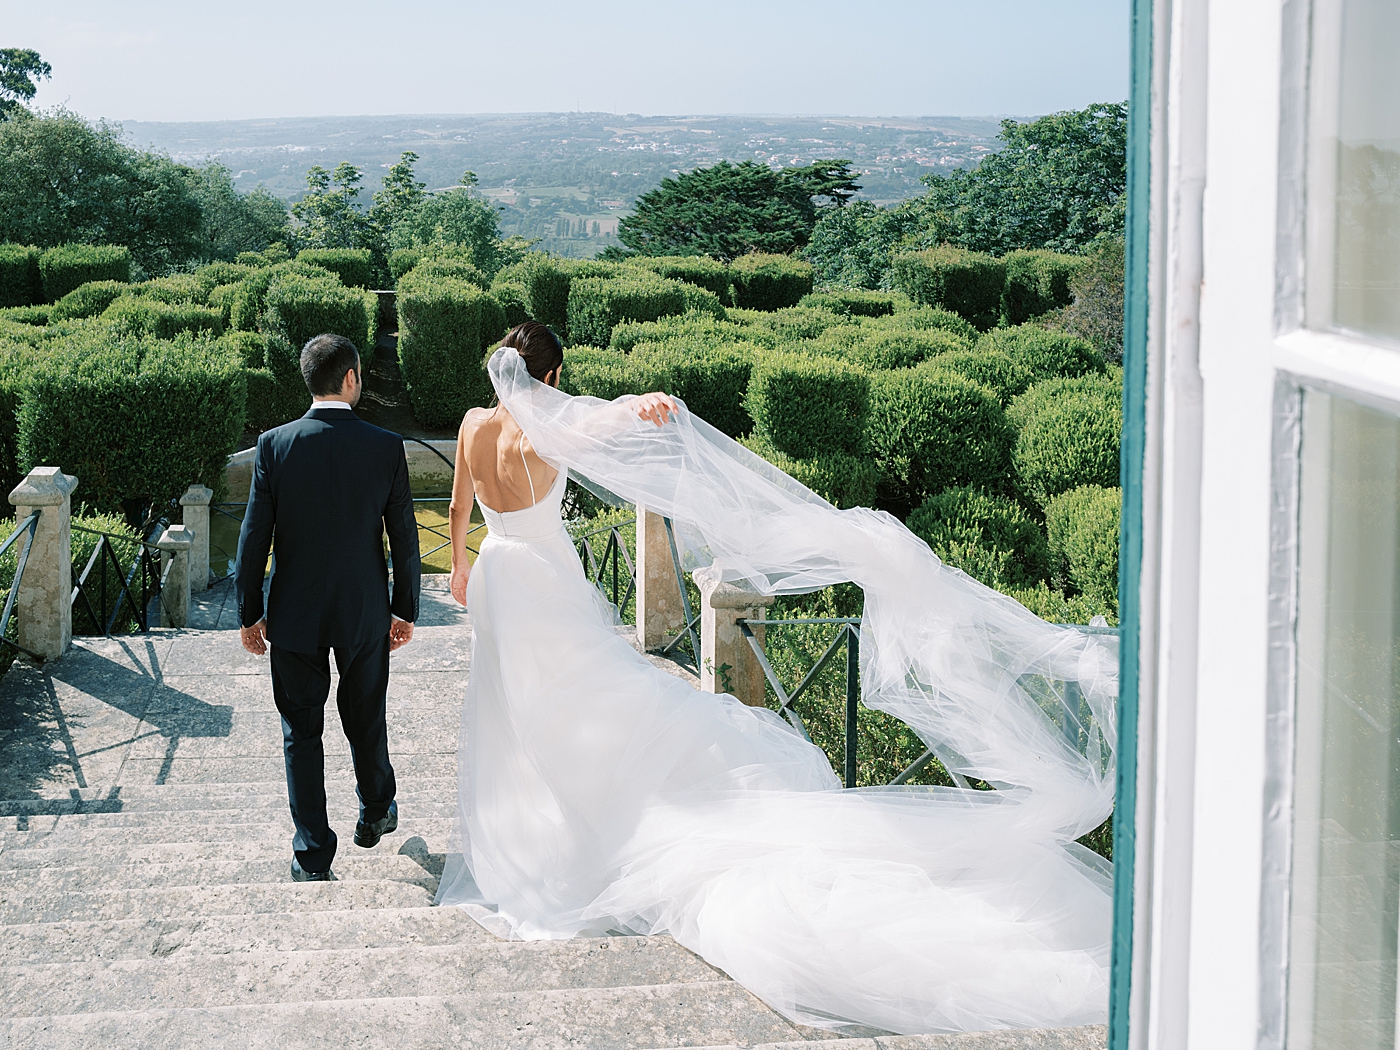 Bride and groom walking down a path | Image by Diane Sotero Photography